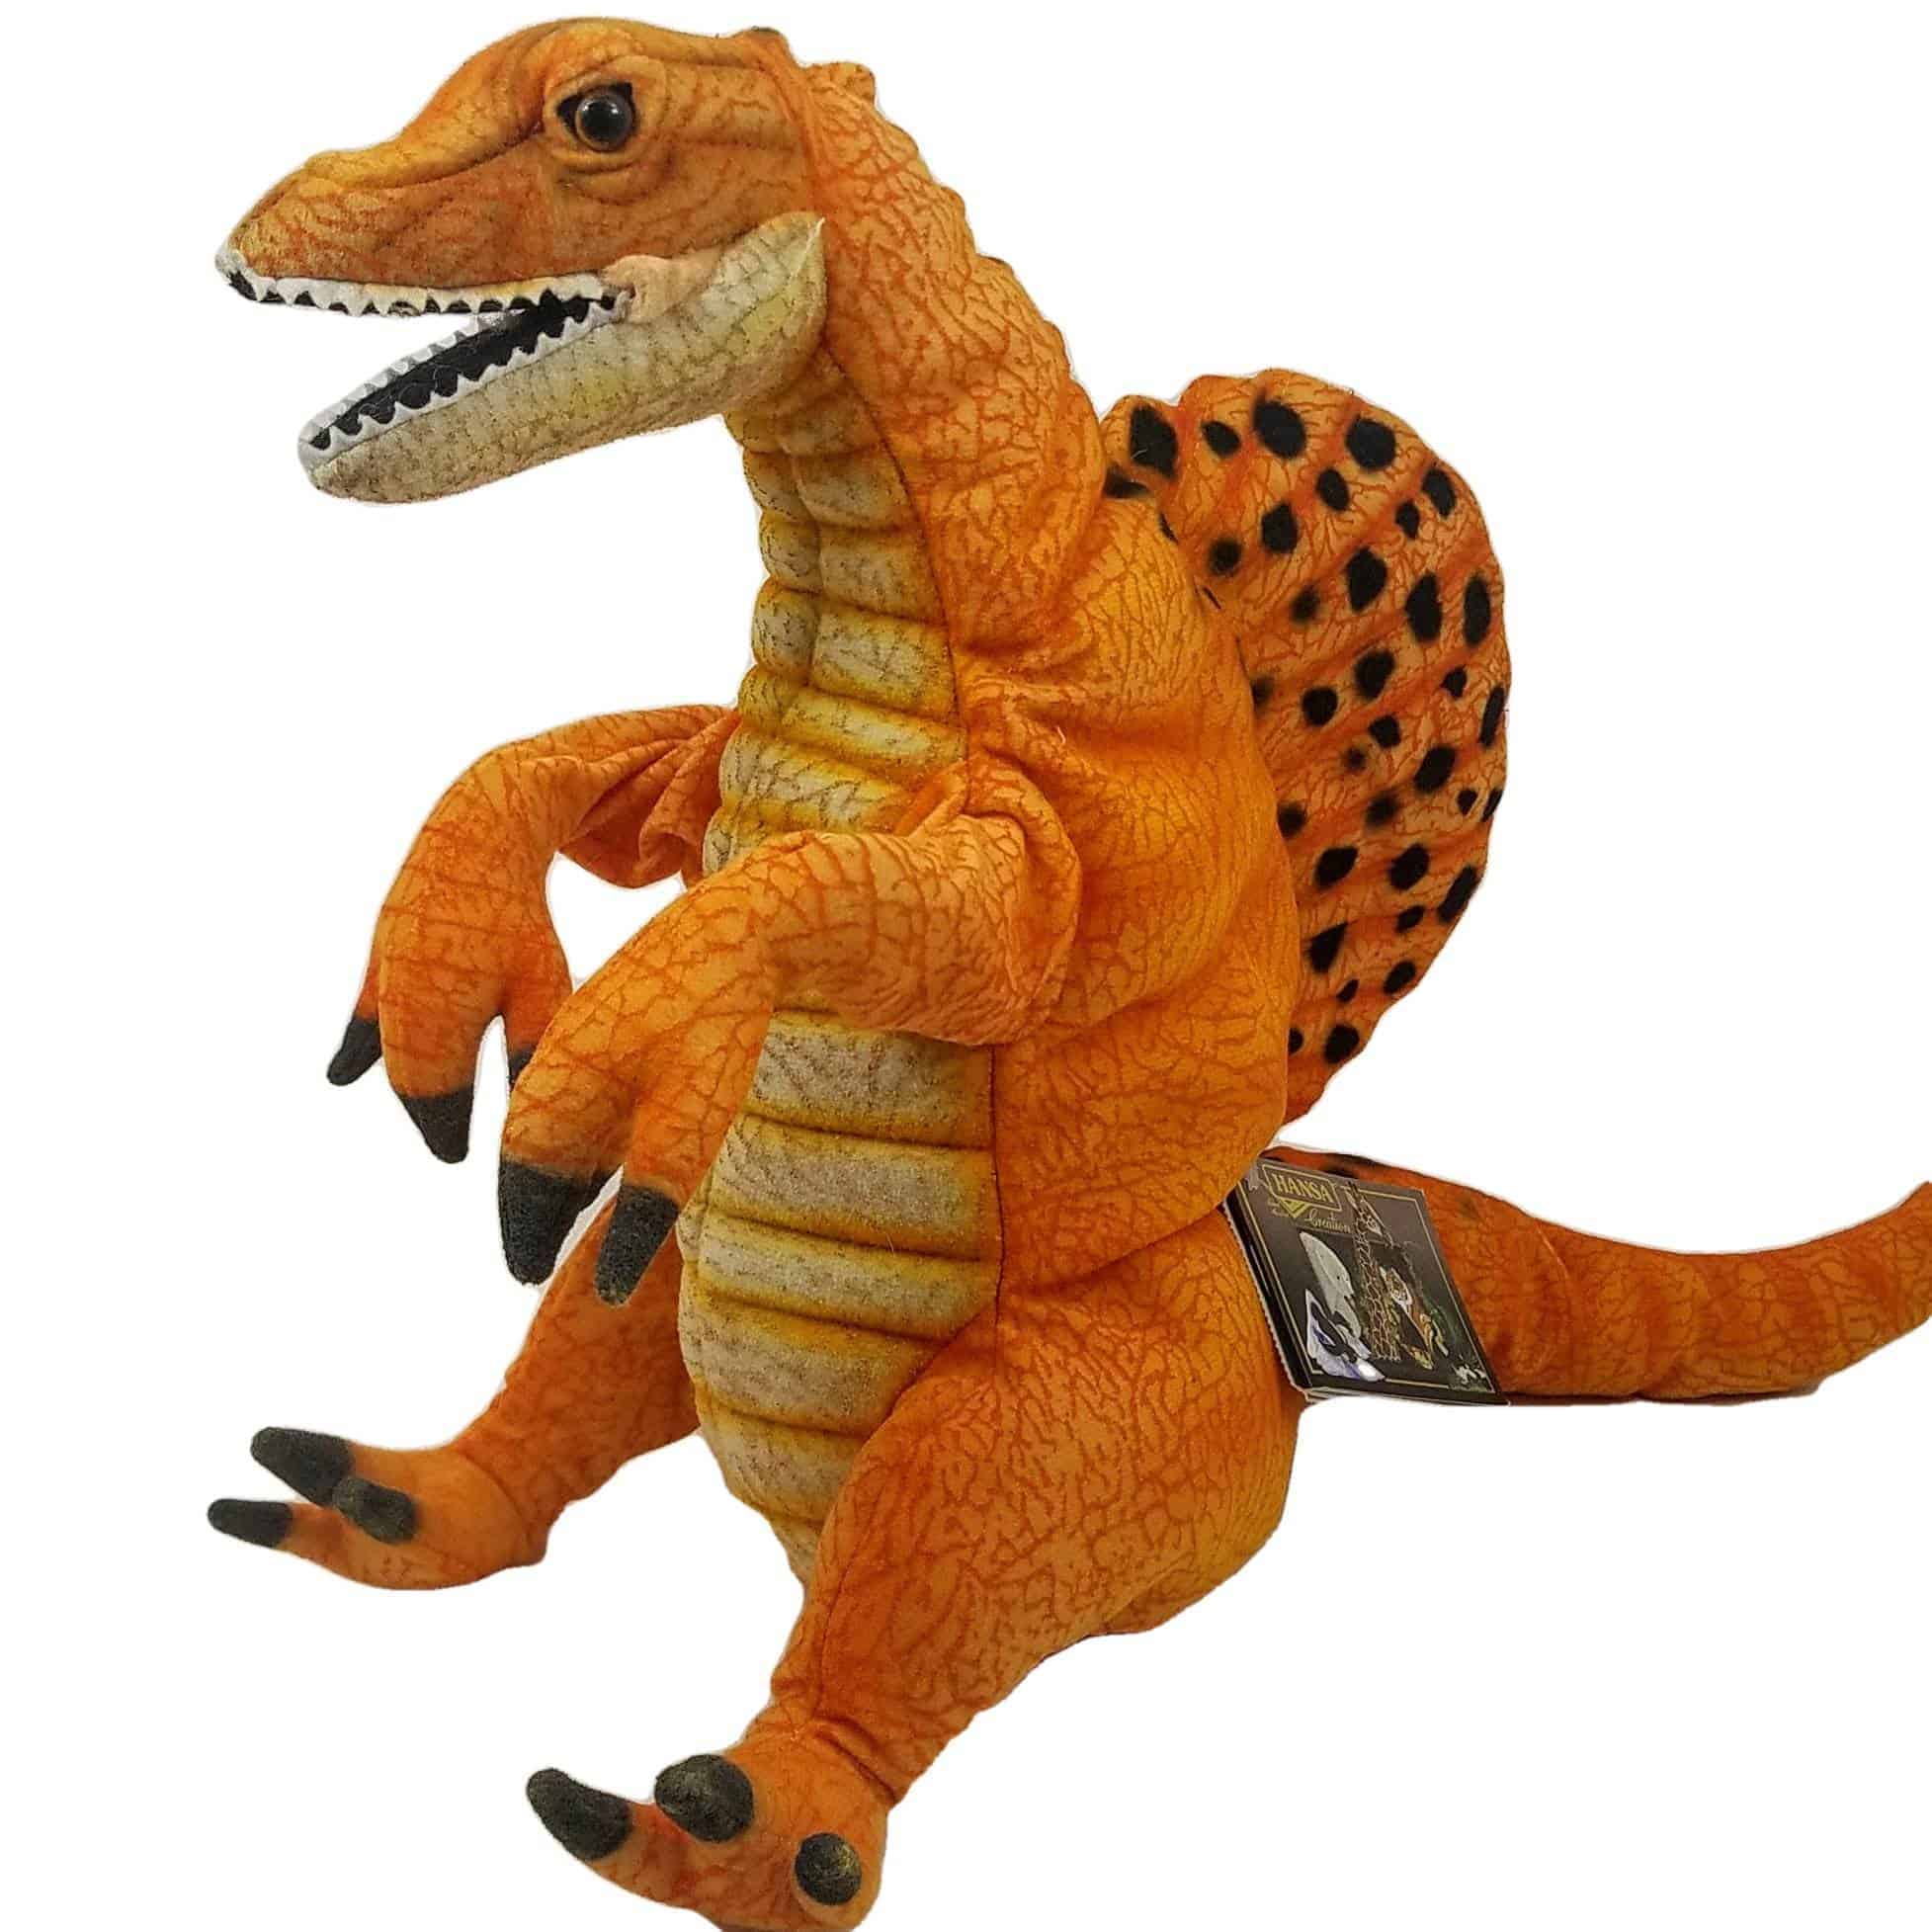 This Spinosaurus Dinosaur Hand Puppet by Hansa True to Life Looking Plush Learning Toy is made with love by Premier Homegoods! Shop more unique gift ideas today with Spots Initiatives, the best way to support creators.